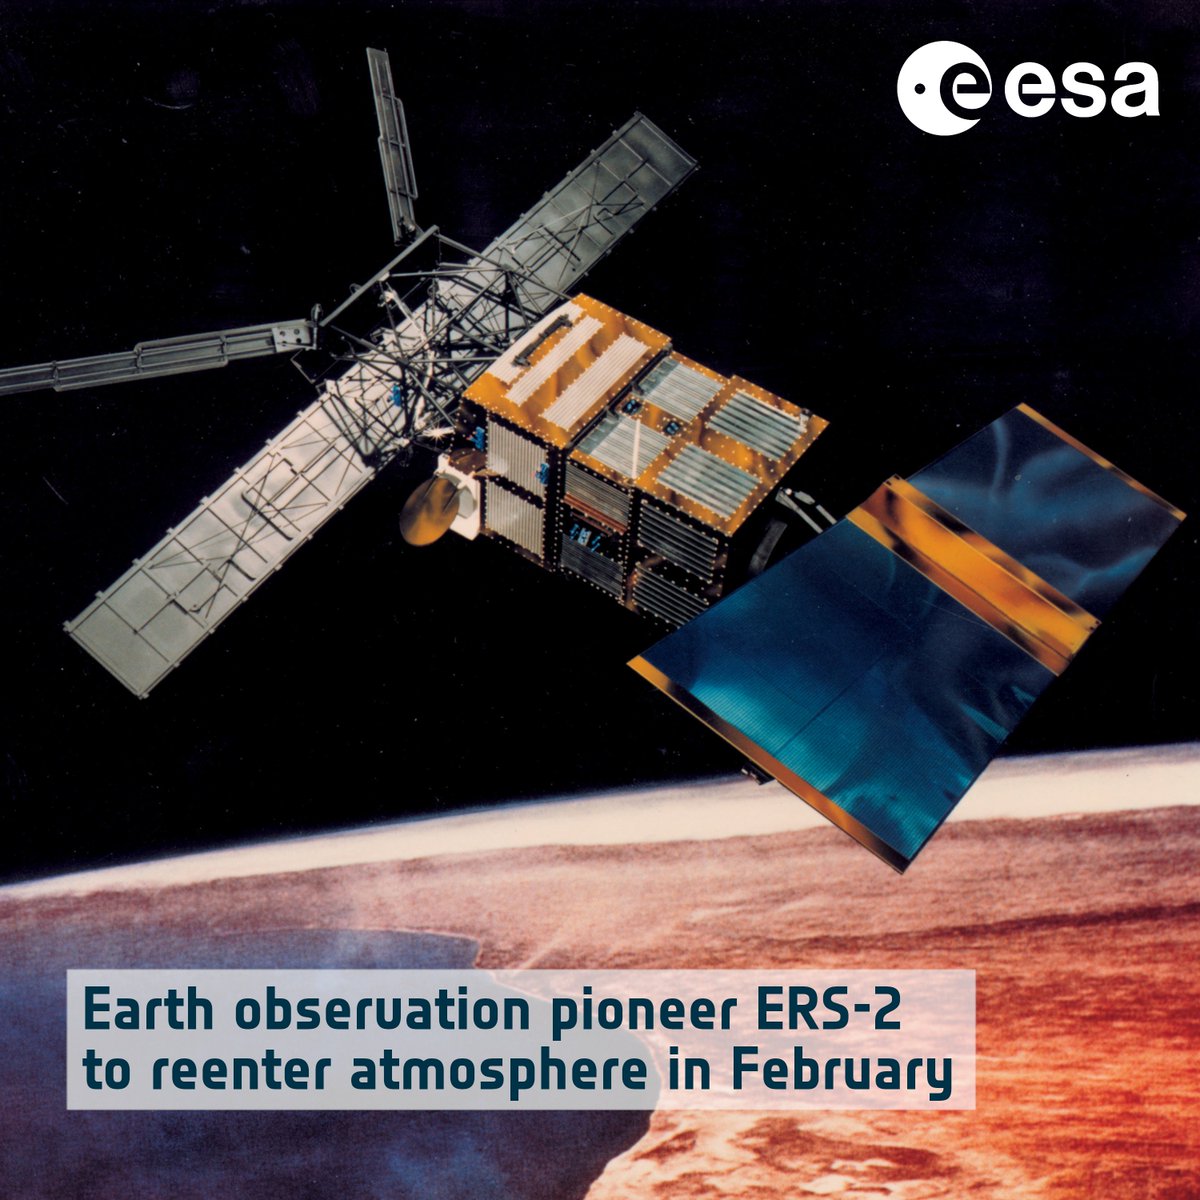 For 16 years, ERS-2 monitored Earth’s land, oceans, ice caps and natural disasters. In 2011, at the end of the mission, we deorbited the satellite to avoid the creation of #SpaceDebris. This month, it comes home. Live blog: blogs.esa.int/rocketscience/… #ERS2reentry #SpaceSafety